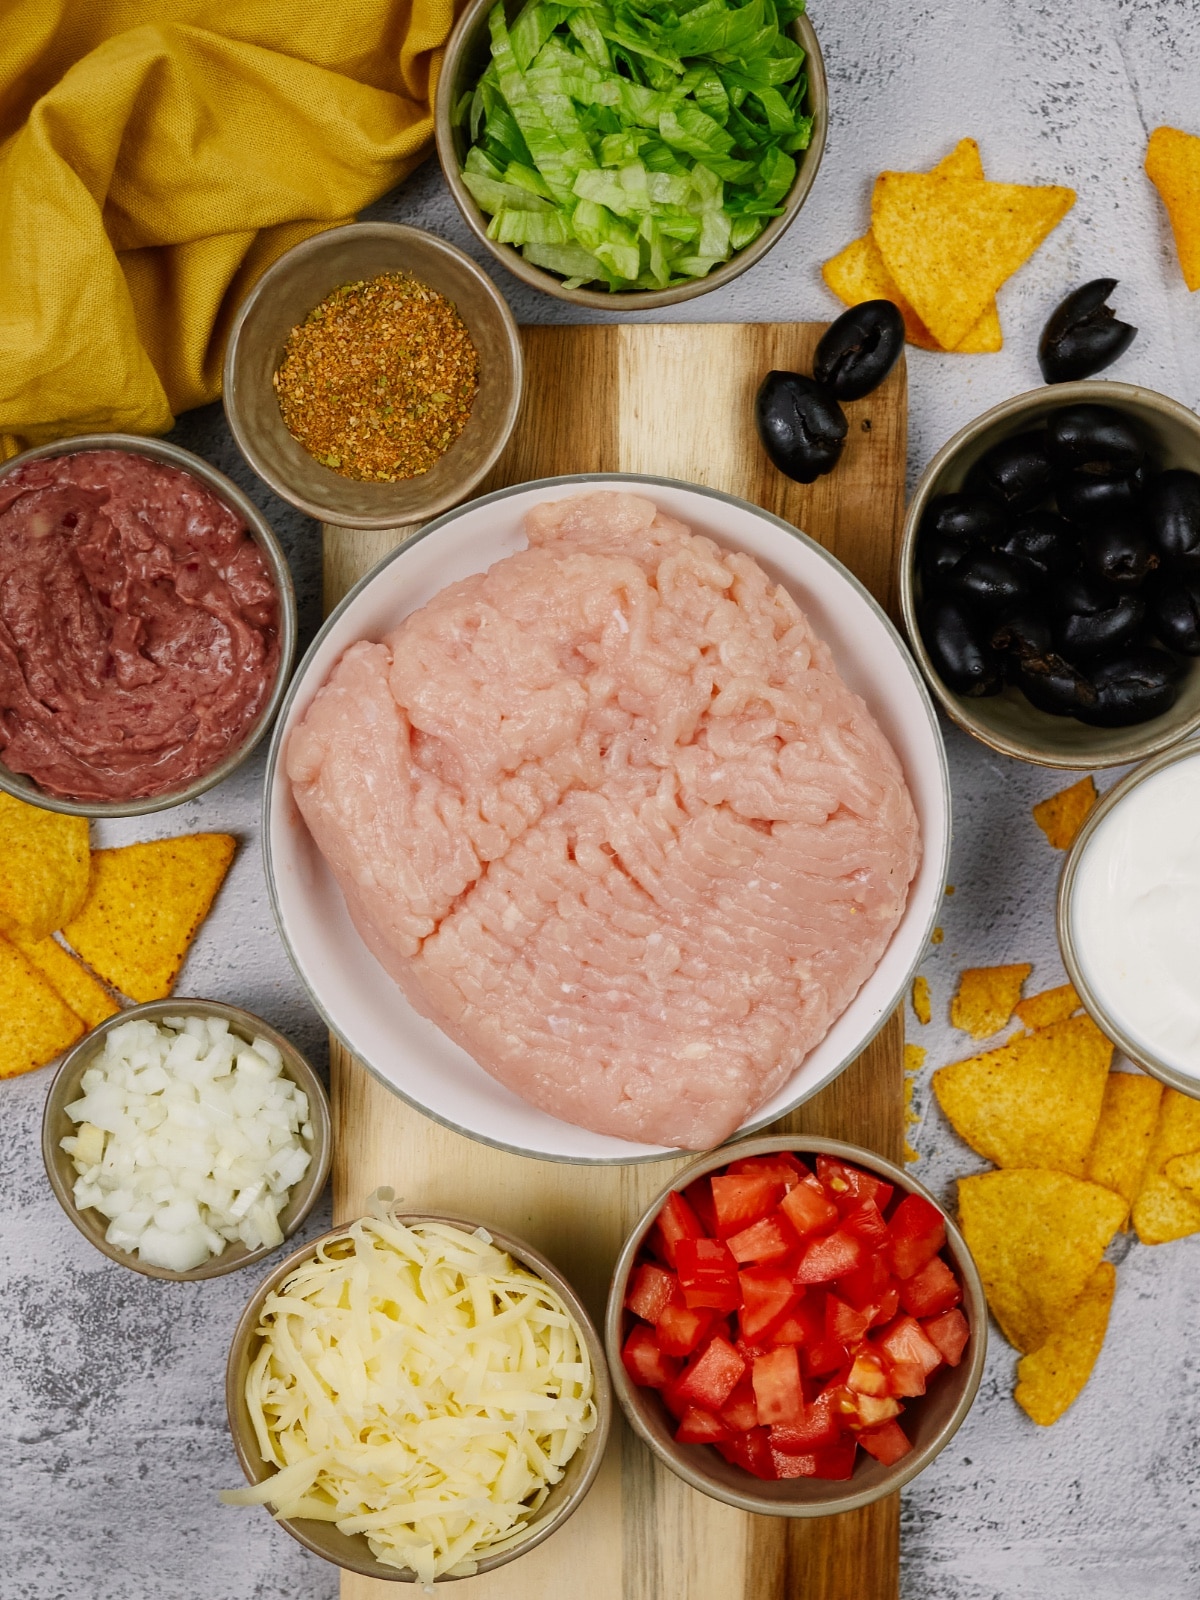 ingredients for Mexican casserole in bowls on a light colored surface